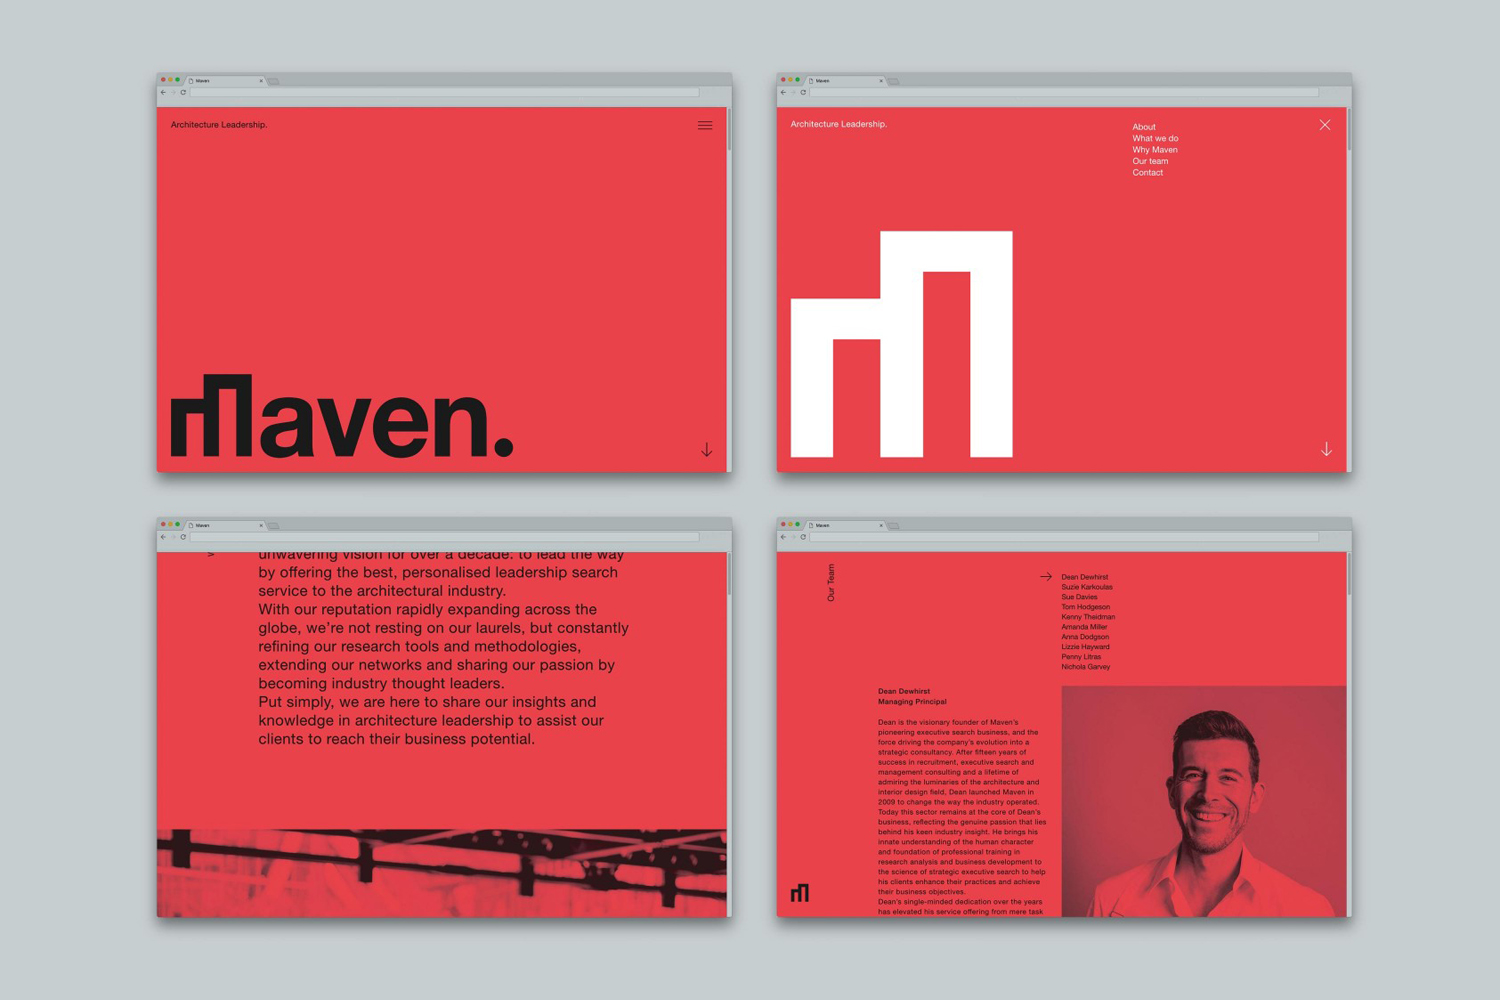 Logo and website design by Toko for architecture recruitment agency Maven